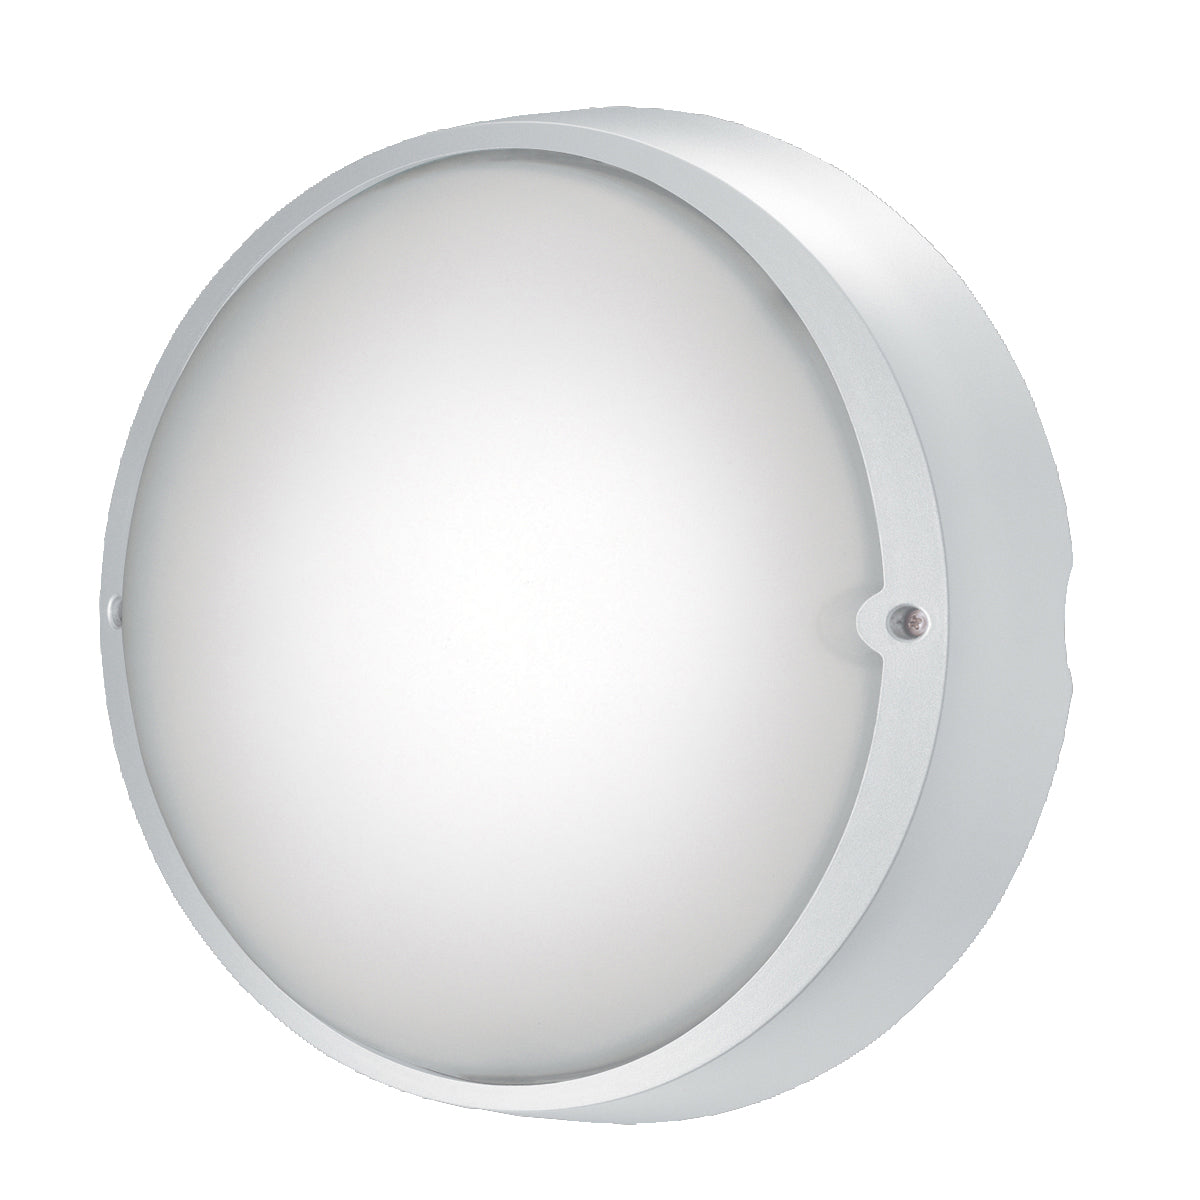 AIRY ROUND Outdoor sconce - 23883-017 | EUROFASE